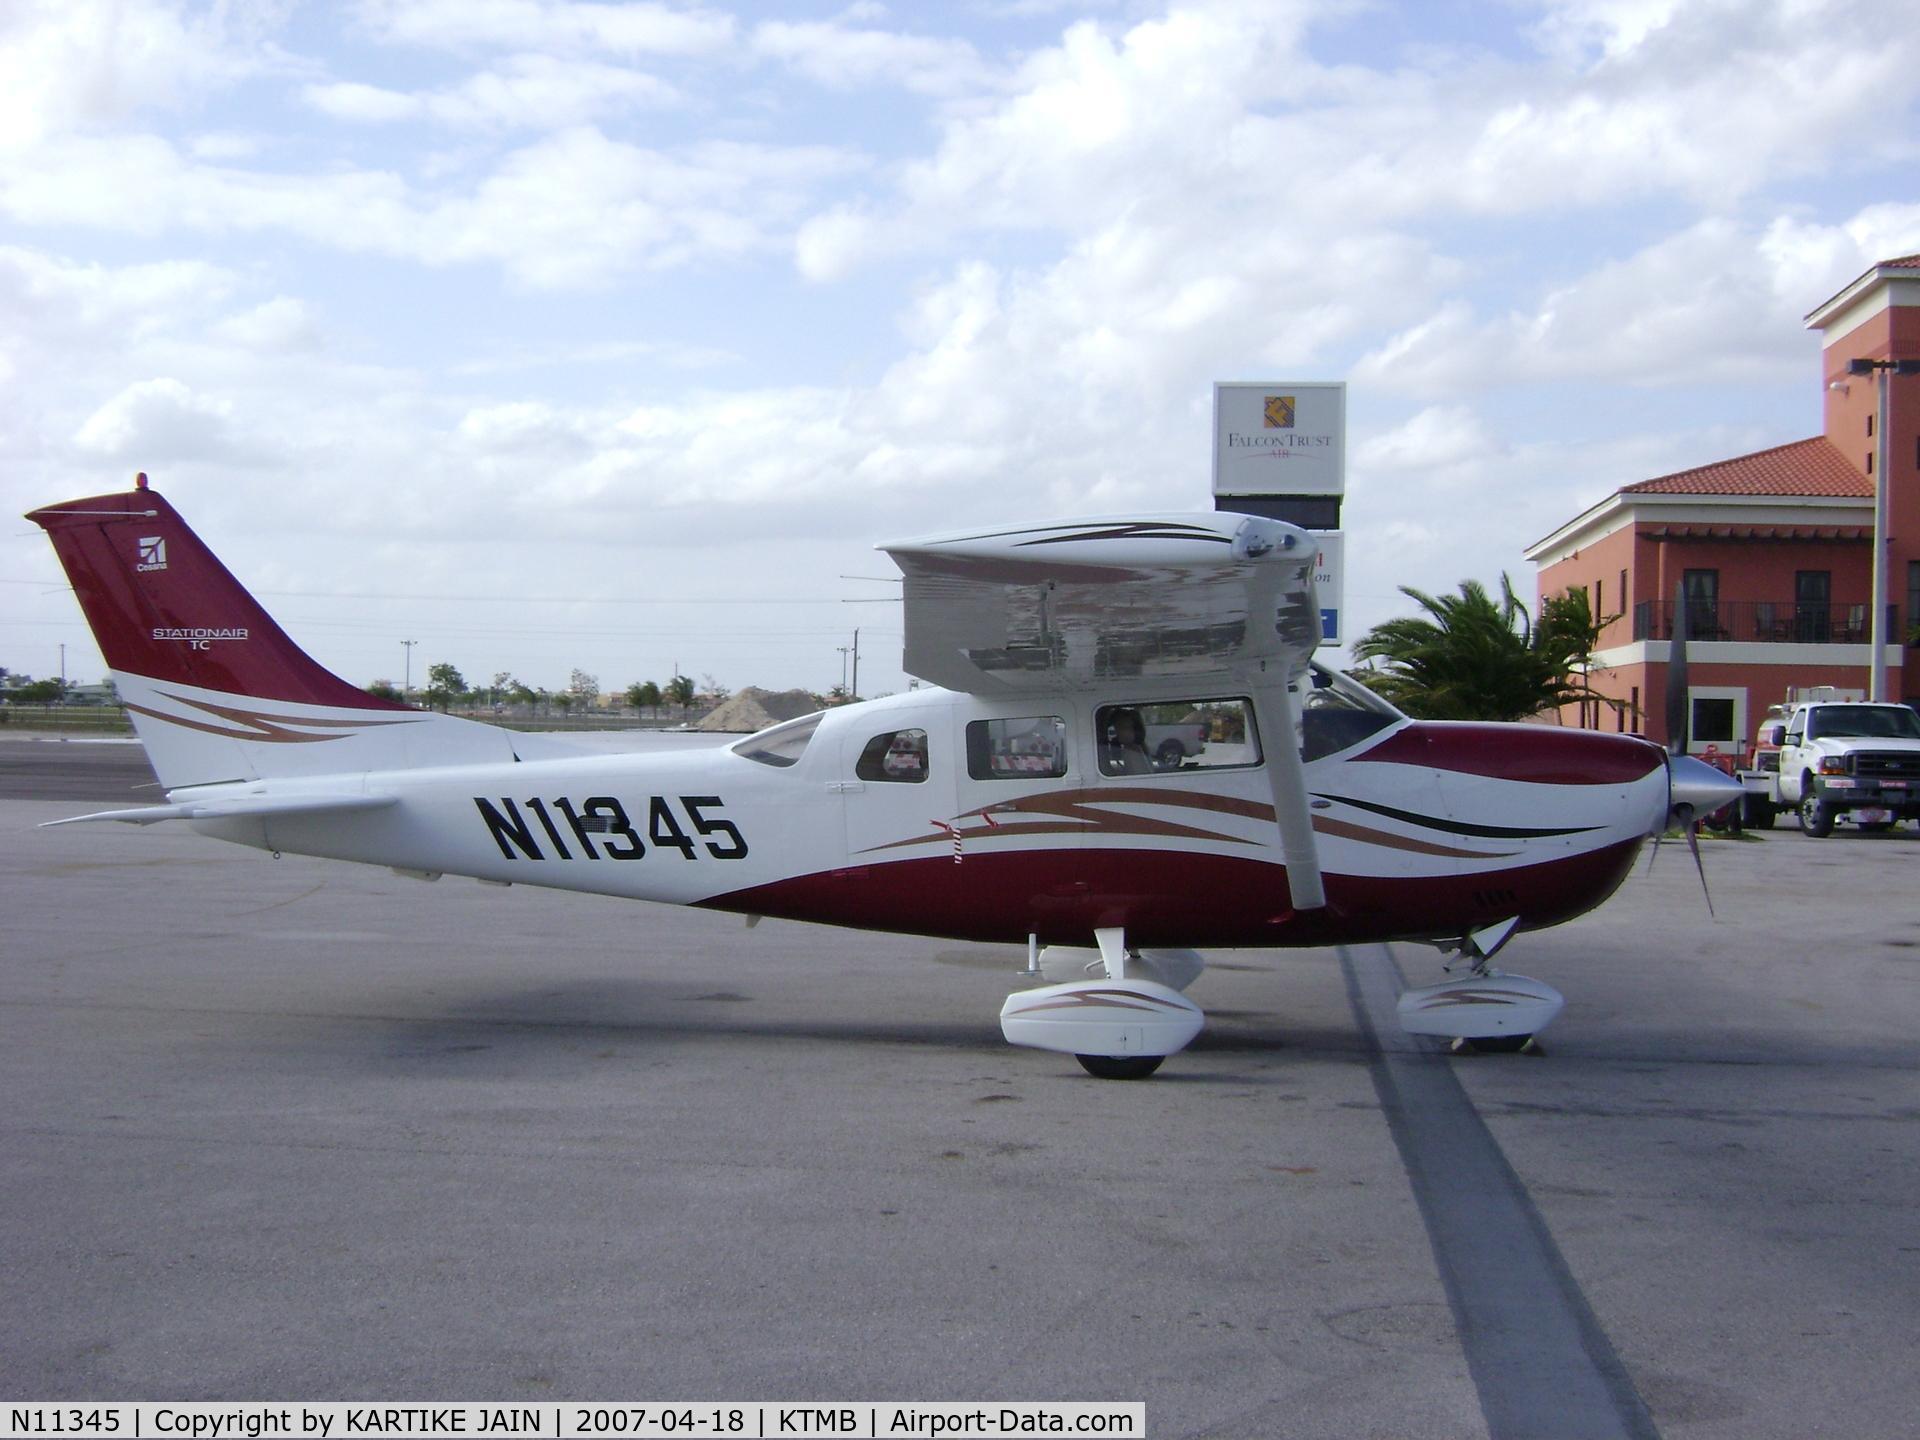 N11345, 2006 Cessna T206H Turbo Stationair C/N T20608668, CESSNA T206H @ KENDALL TAMIAMI AIRPORT